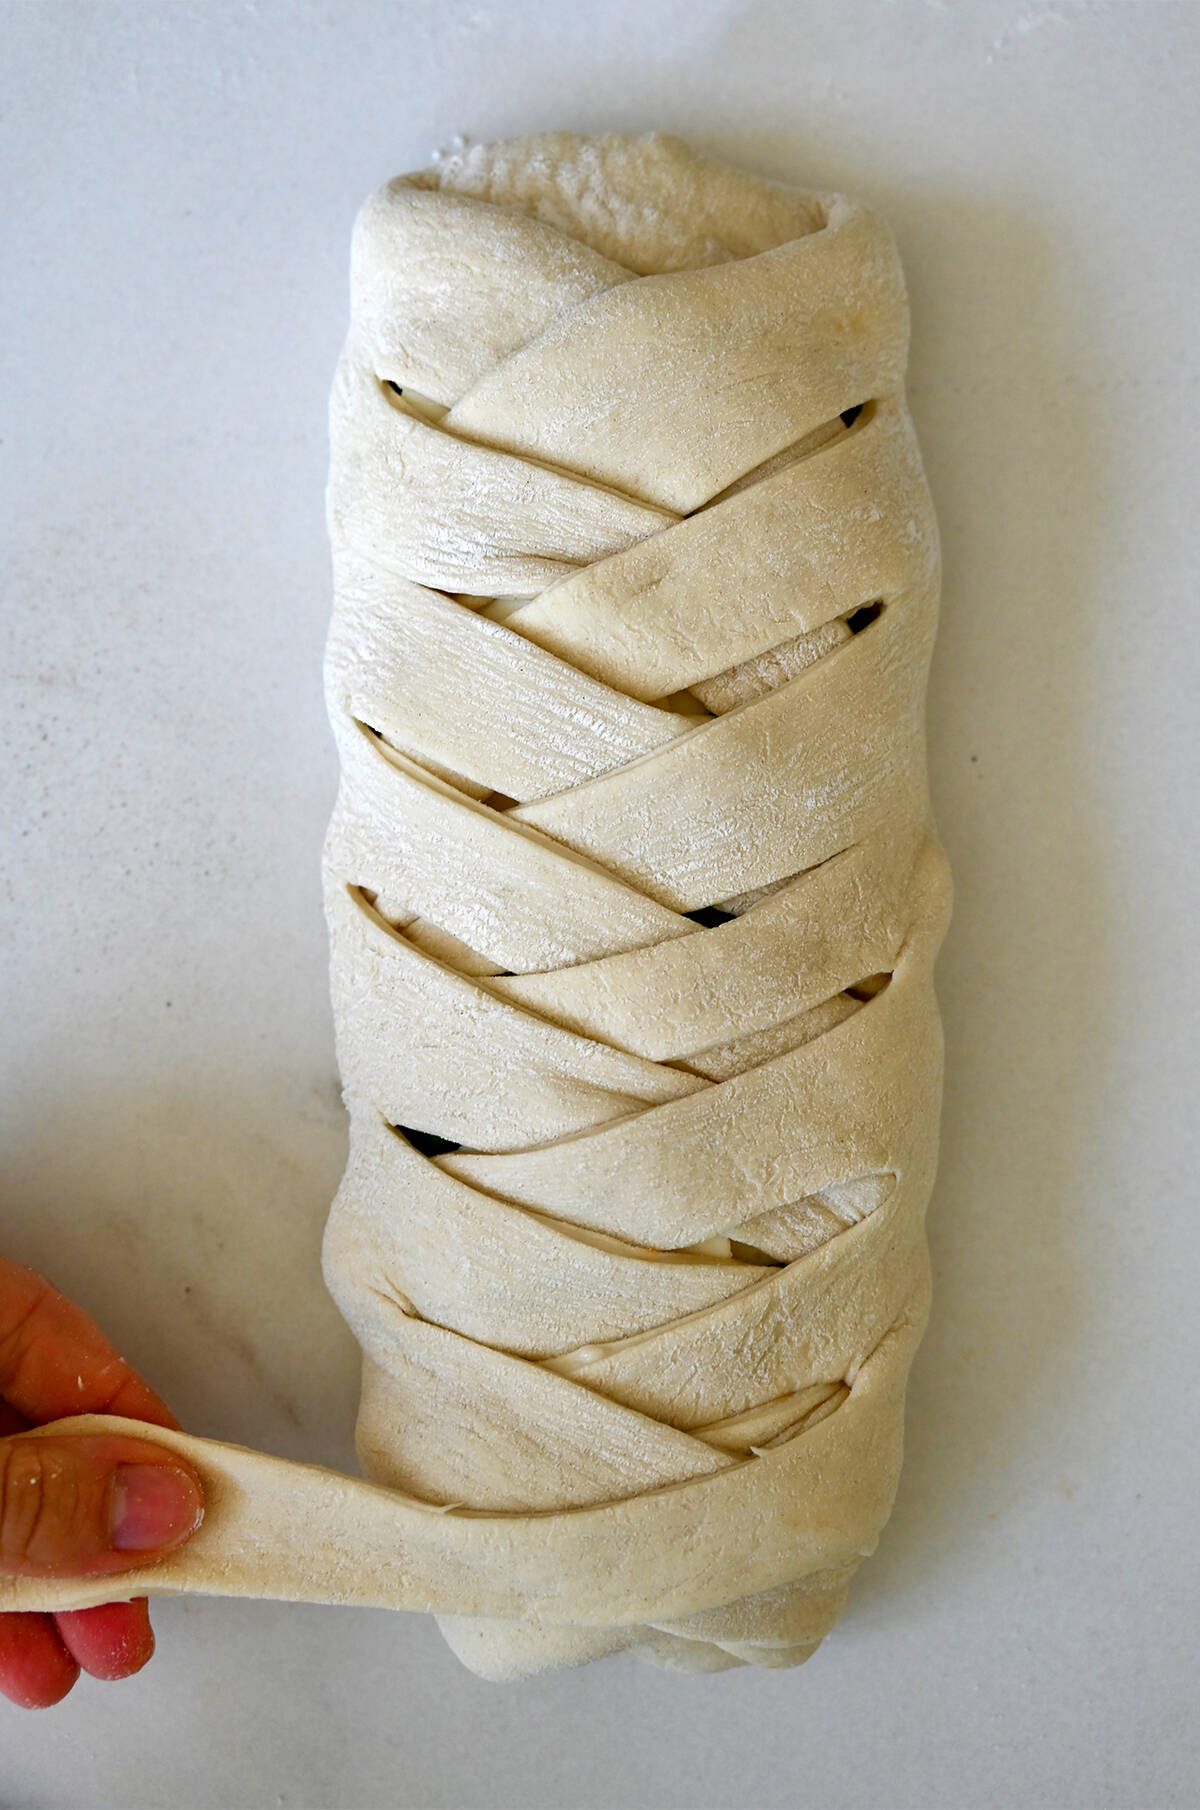 Perfectly braided dough.